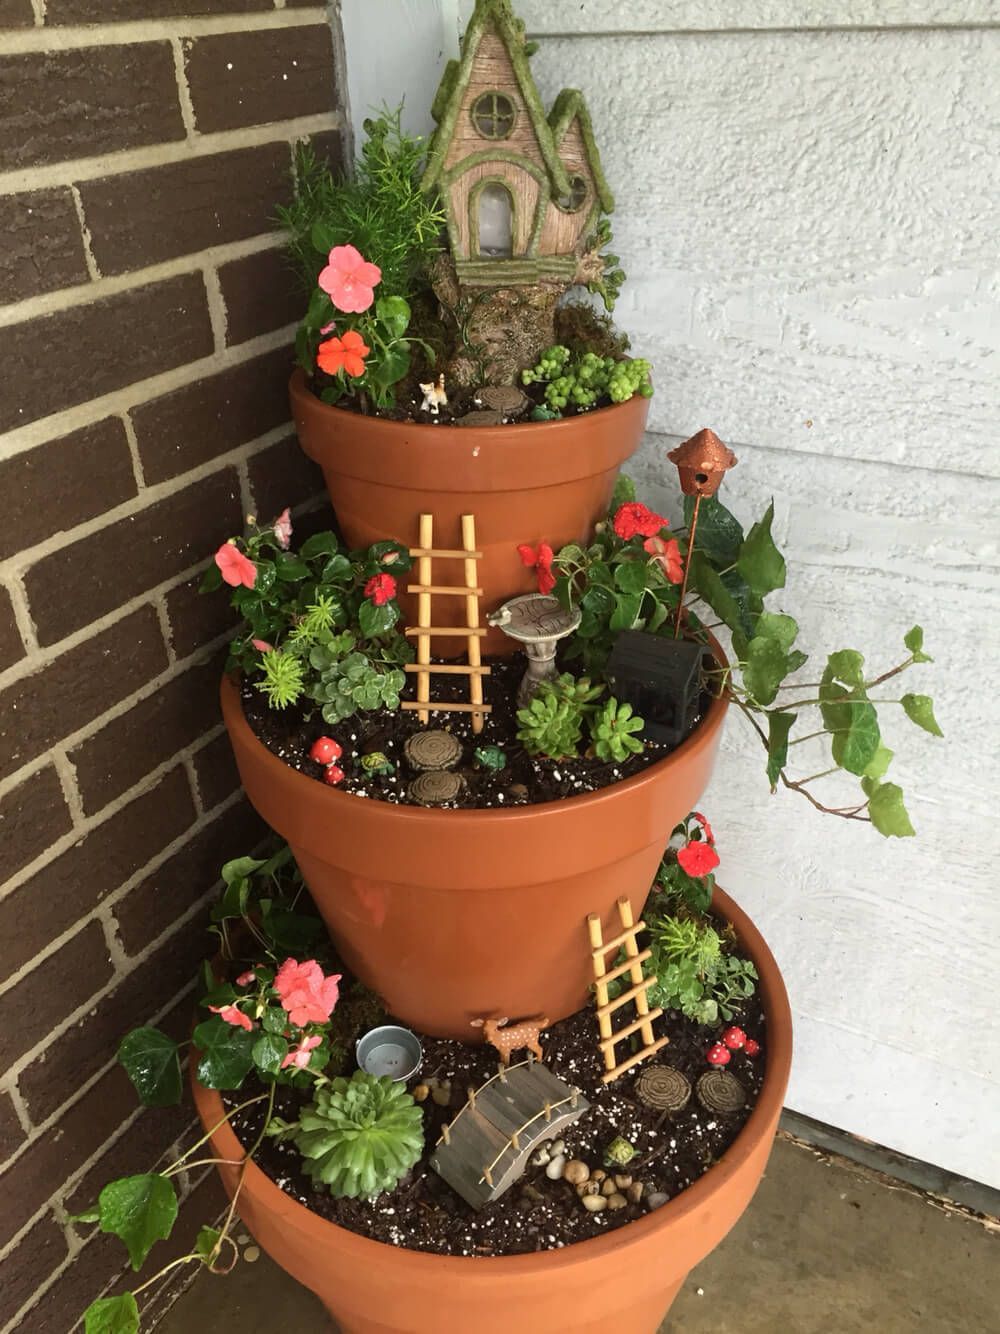 Get your kids to help you freshen up your curb appeal with this craft idea for a Tiered Front Porch Fairy Garden! By adding